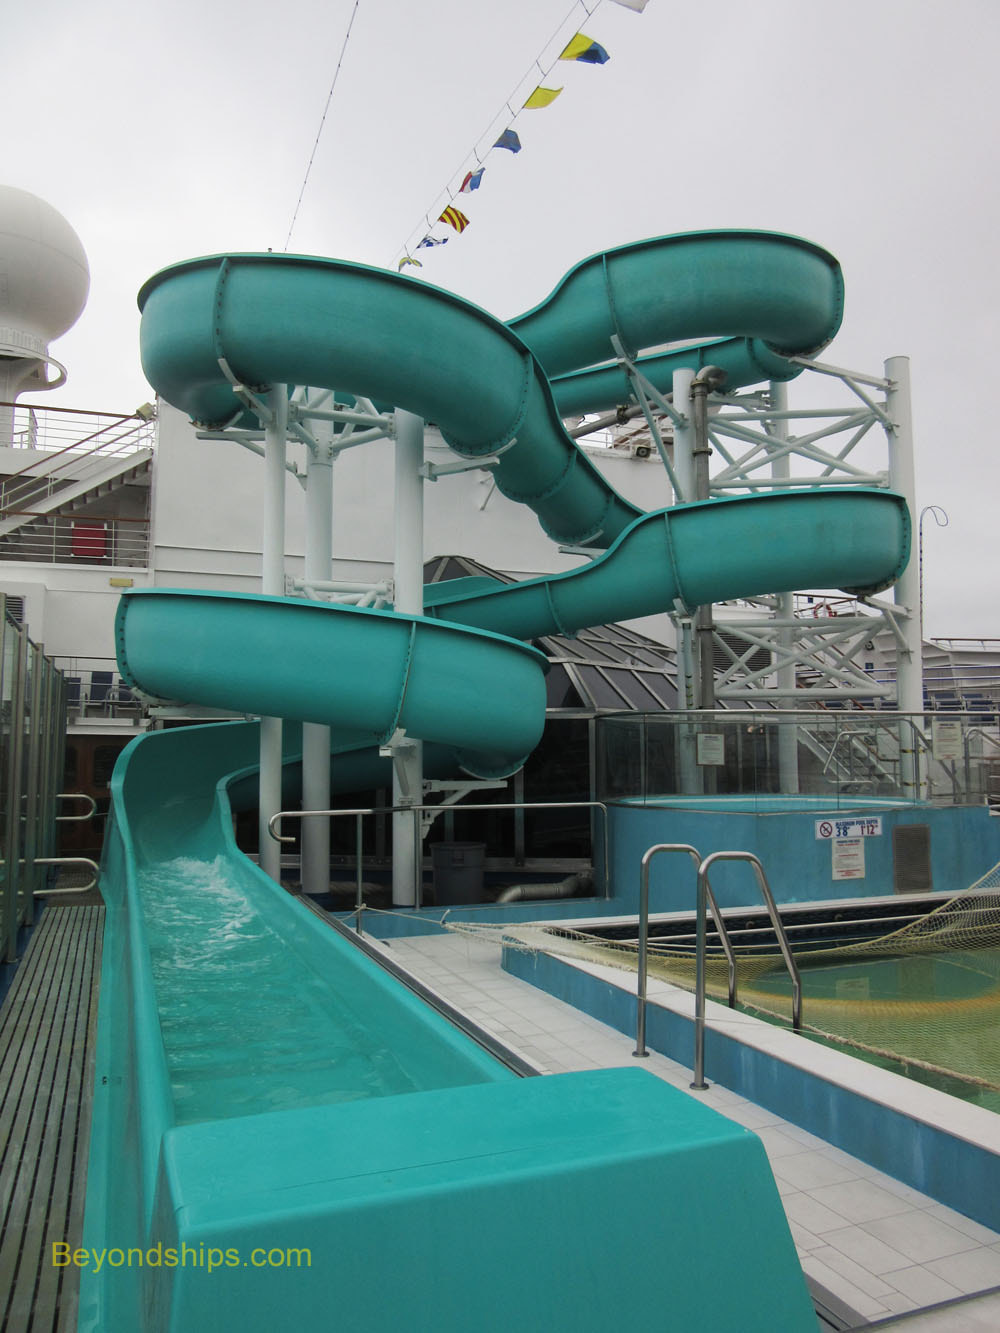 Symphony of the Seas, waterslides